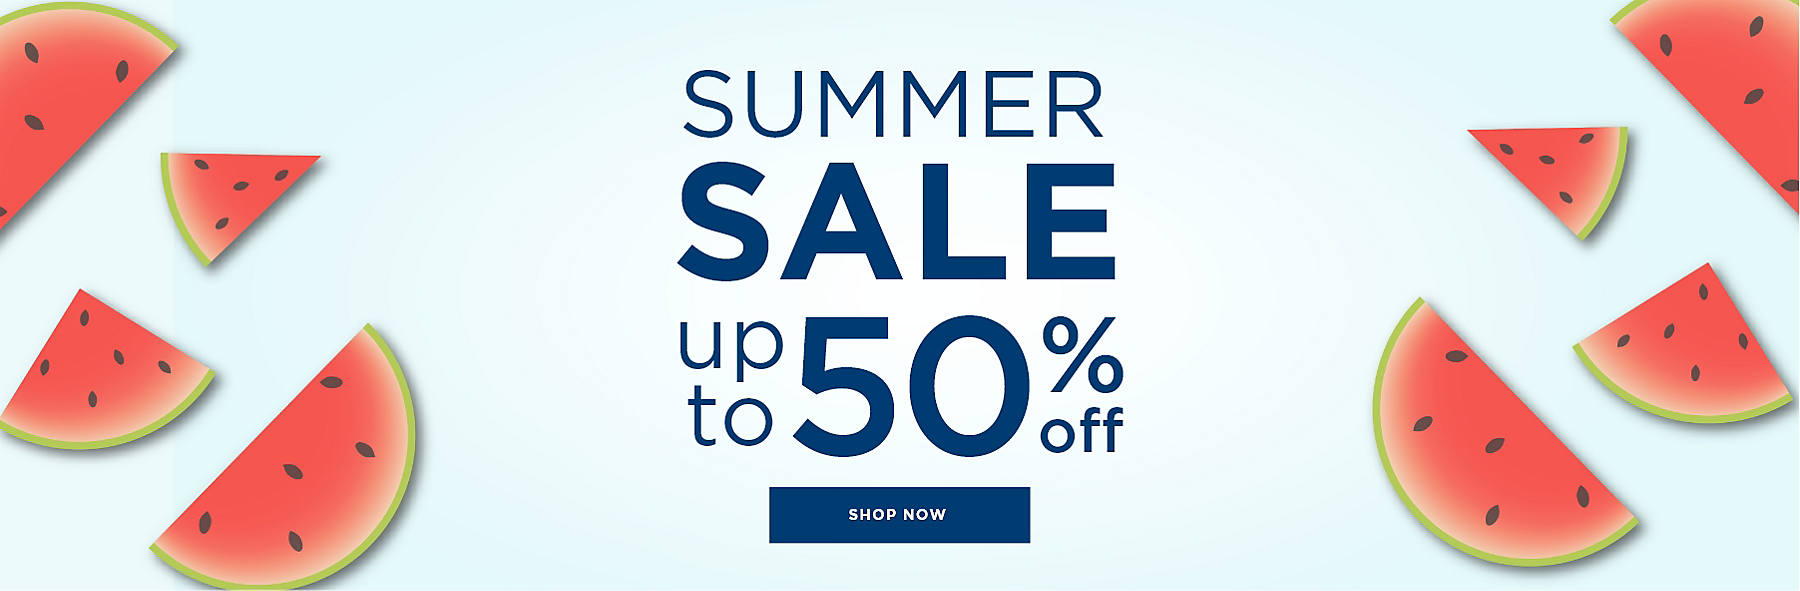 Summer Sale up to 50% Off Shop Now